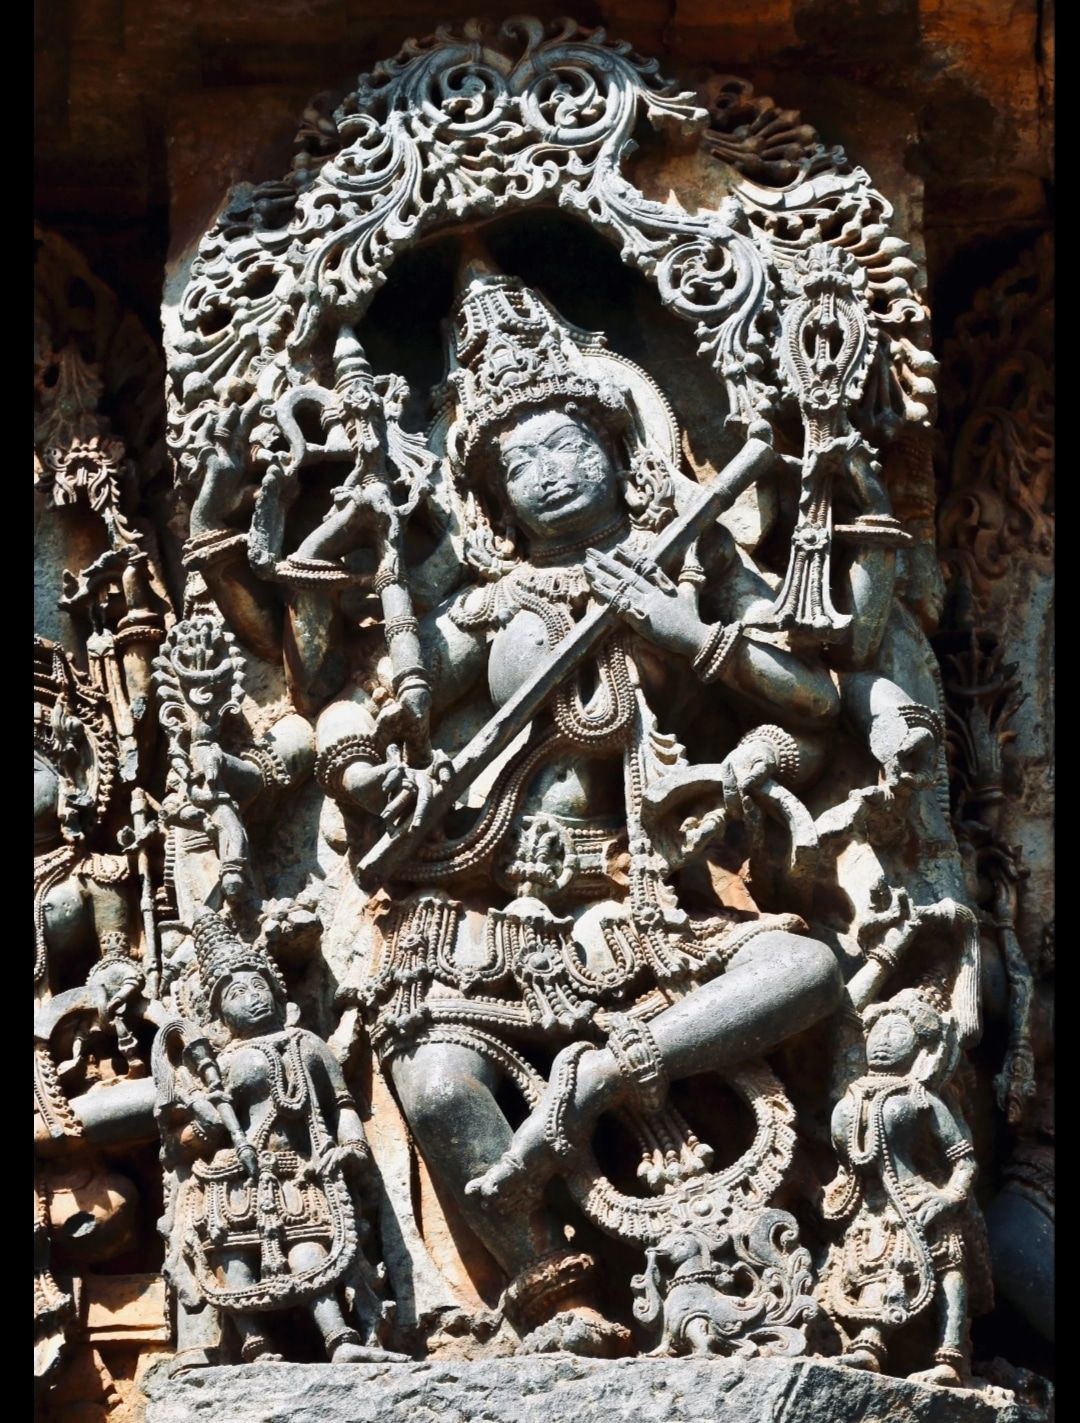 The intricate carvings of belur temples 1